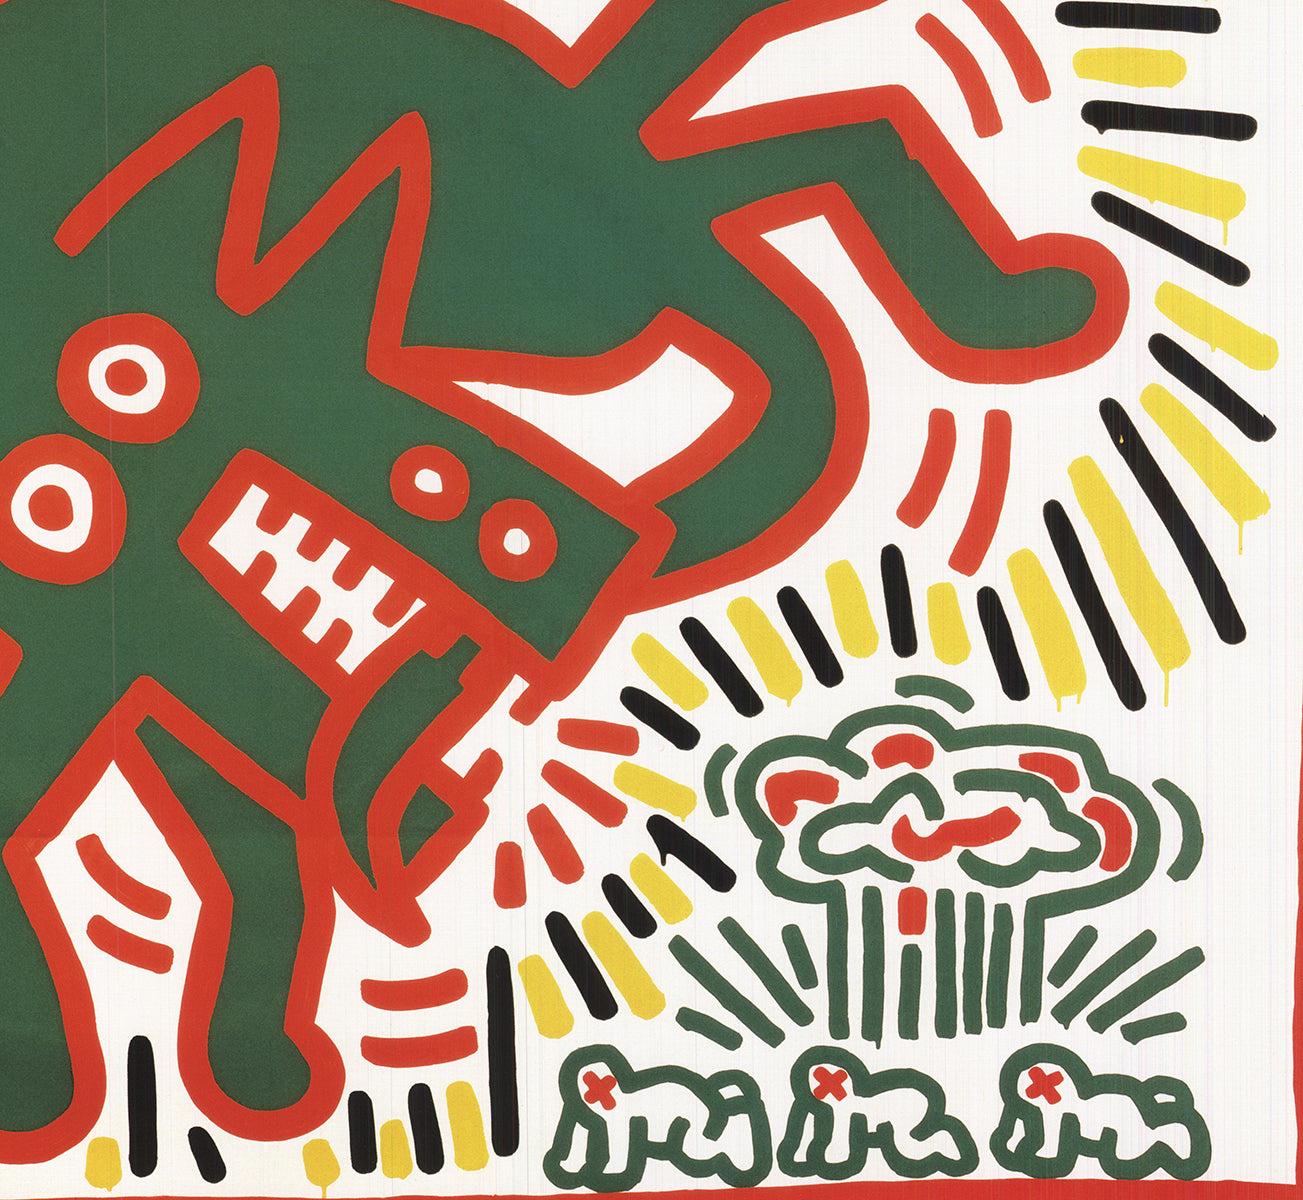 Keith Haring 'Untitled, 1983' 2008- Lithographie offset en vente 3